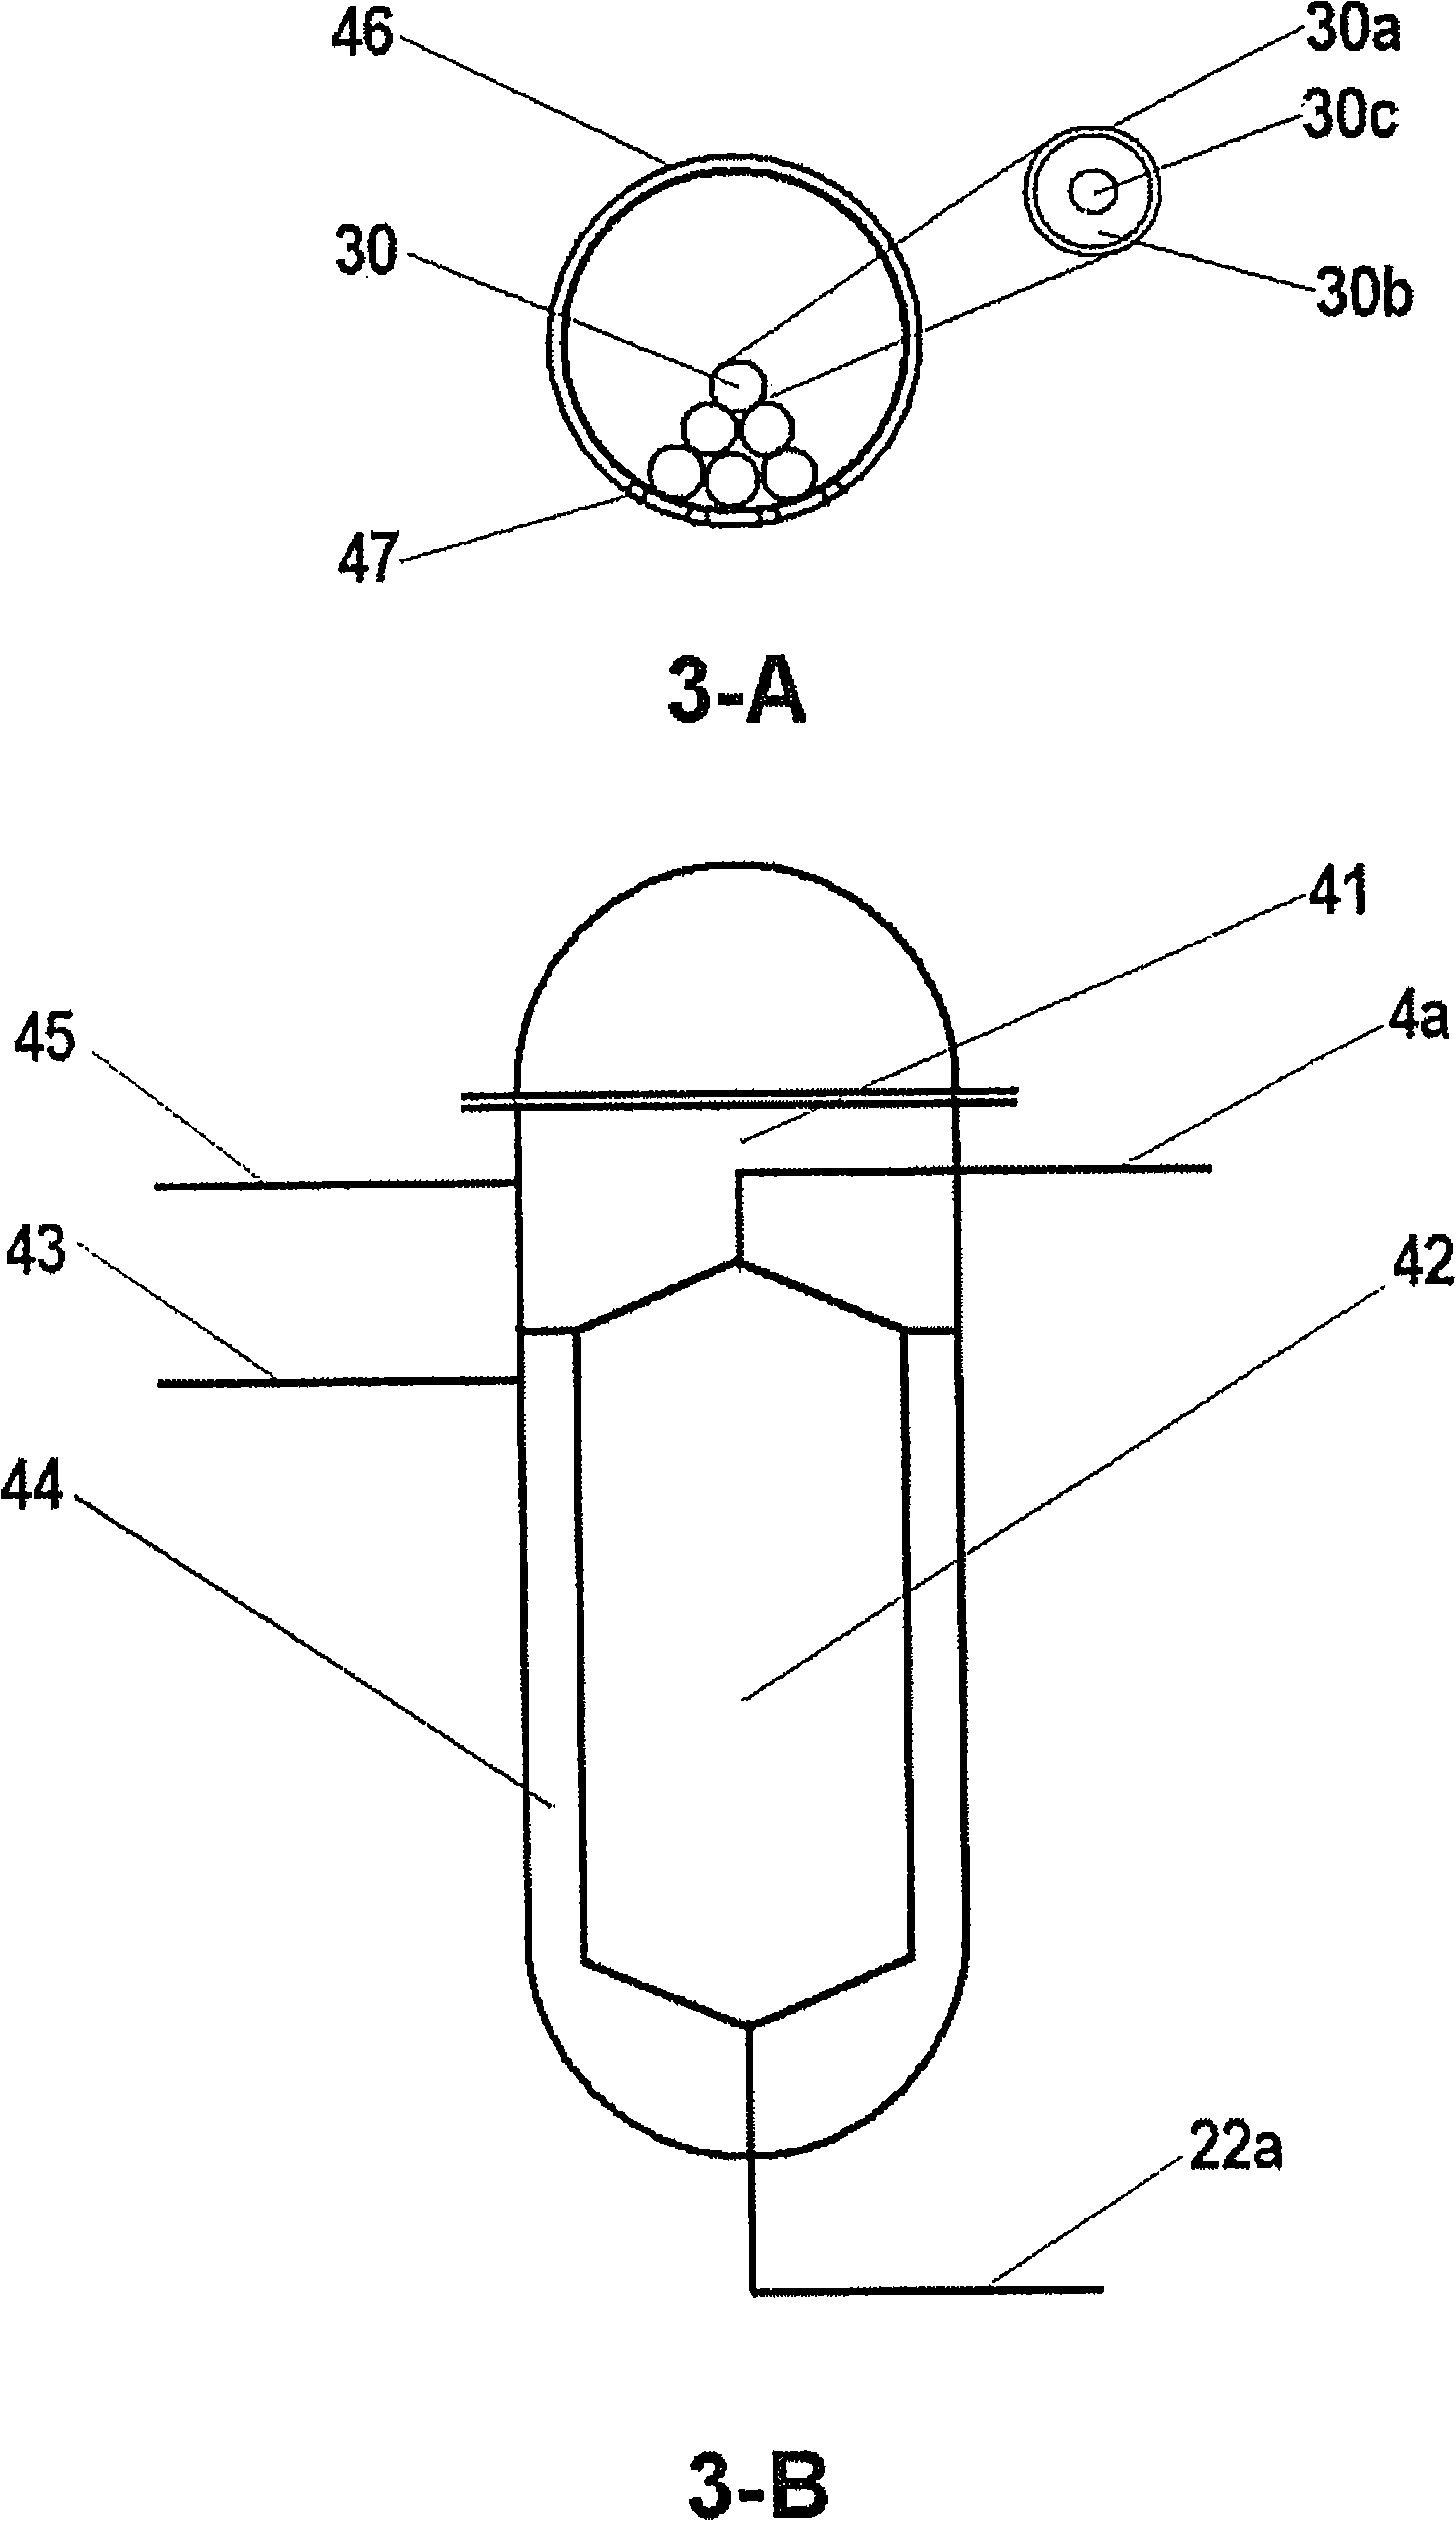 Method and device for fast breeding and converting nuclear fuel